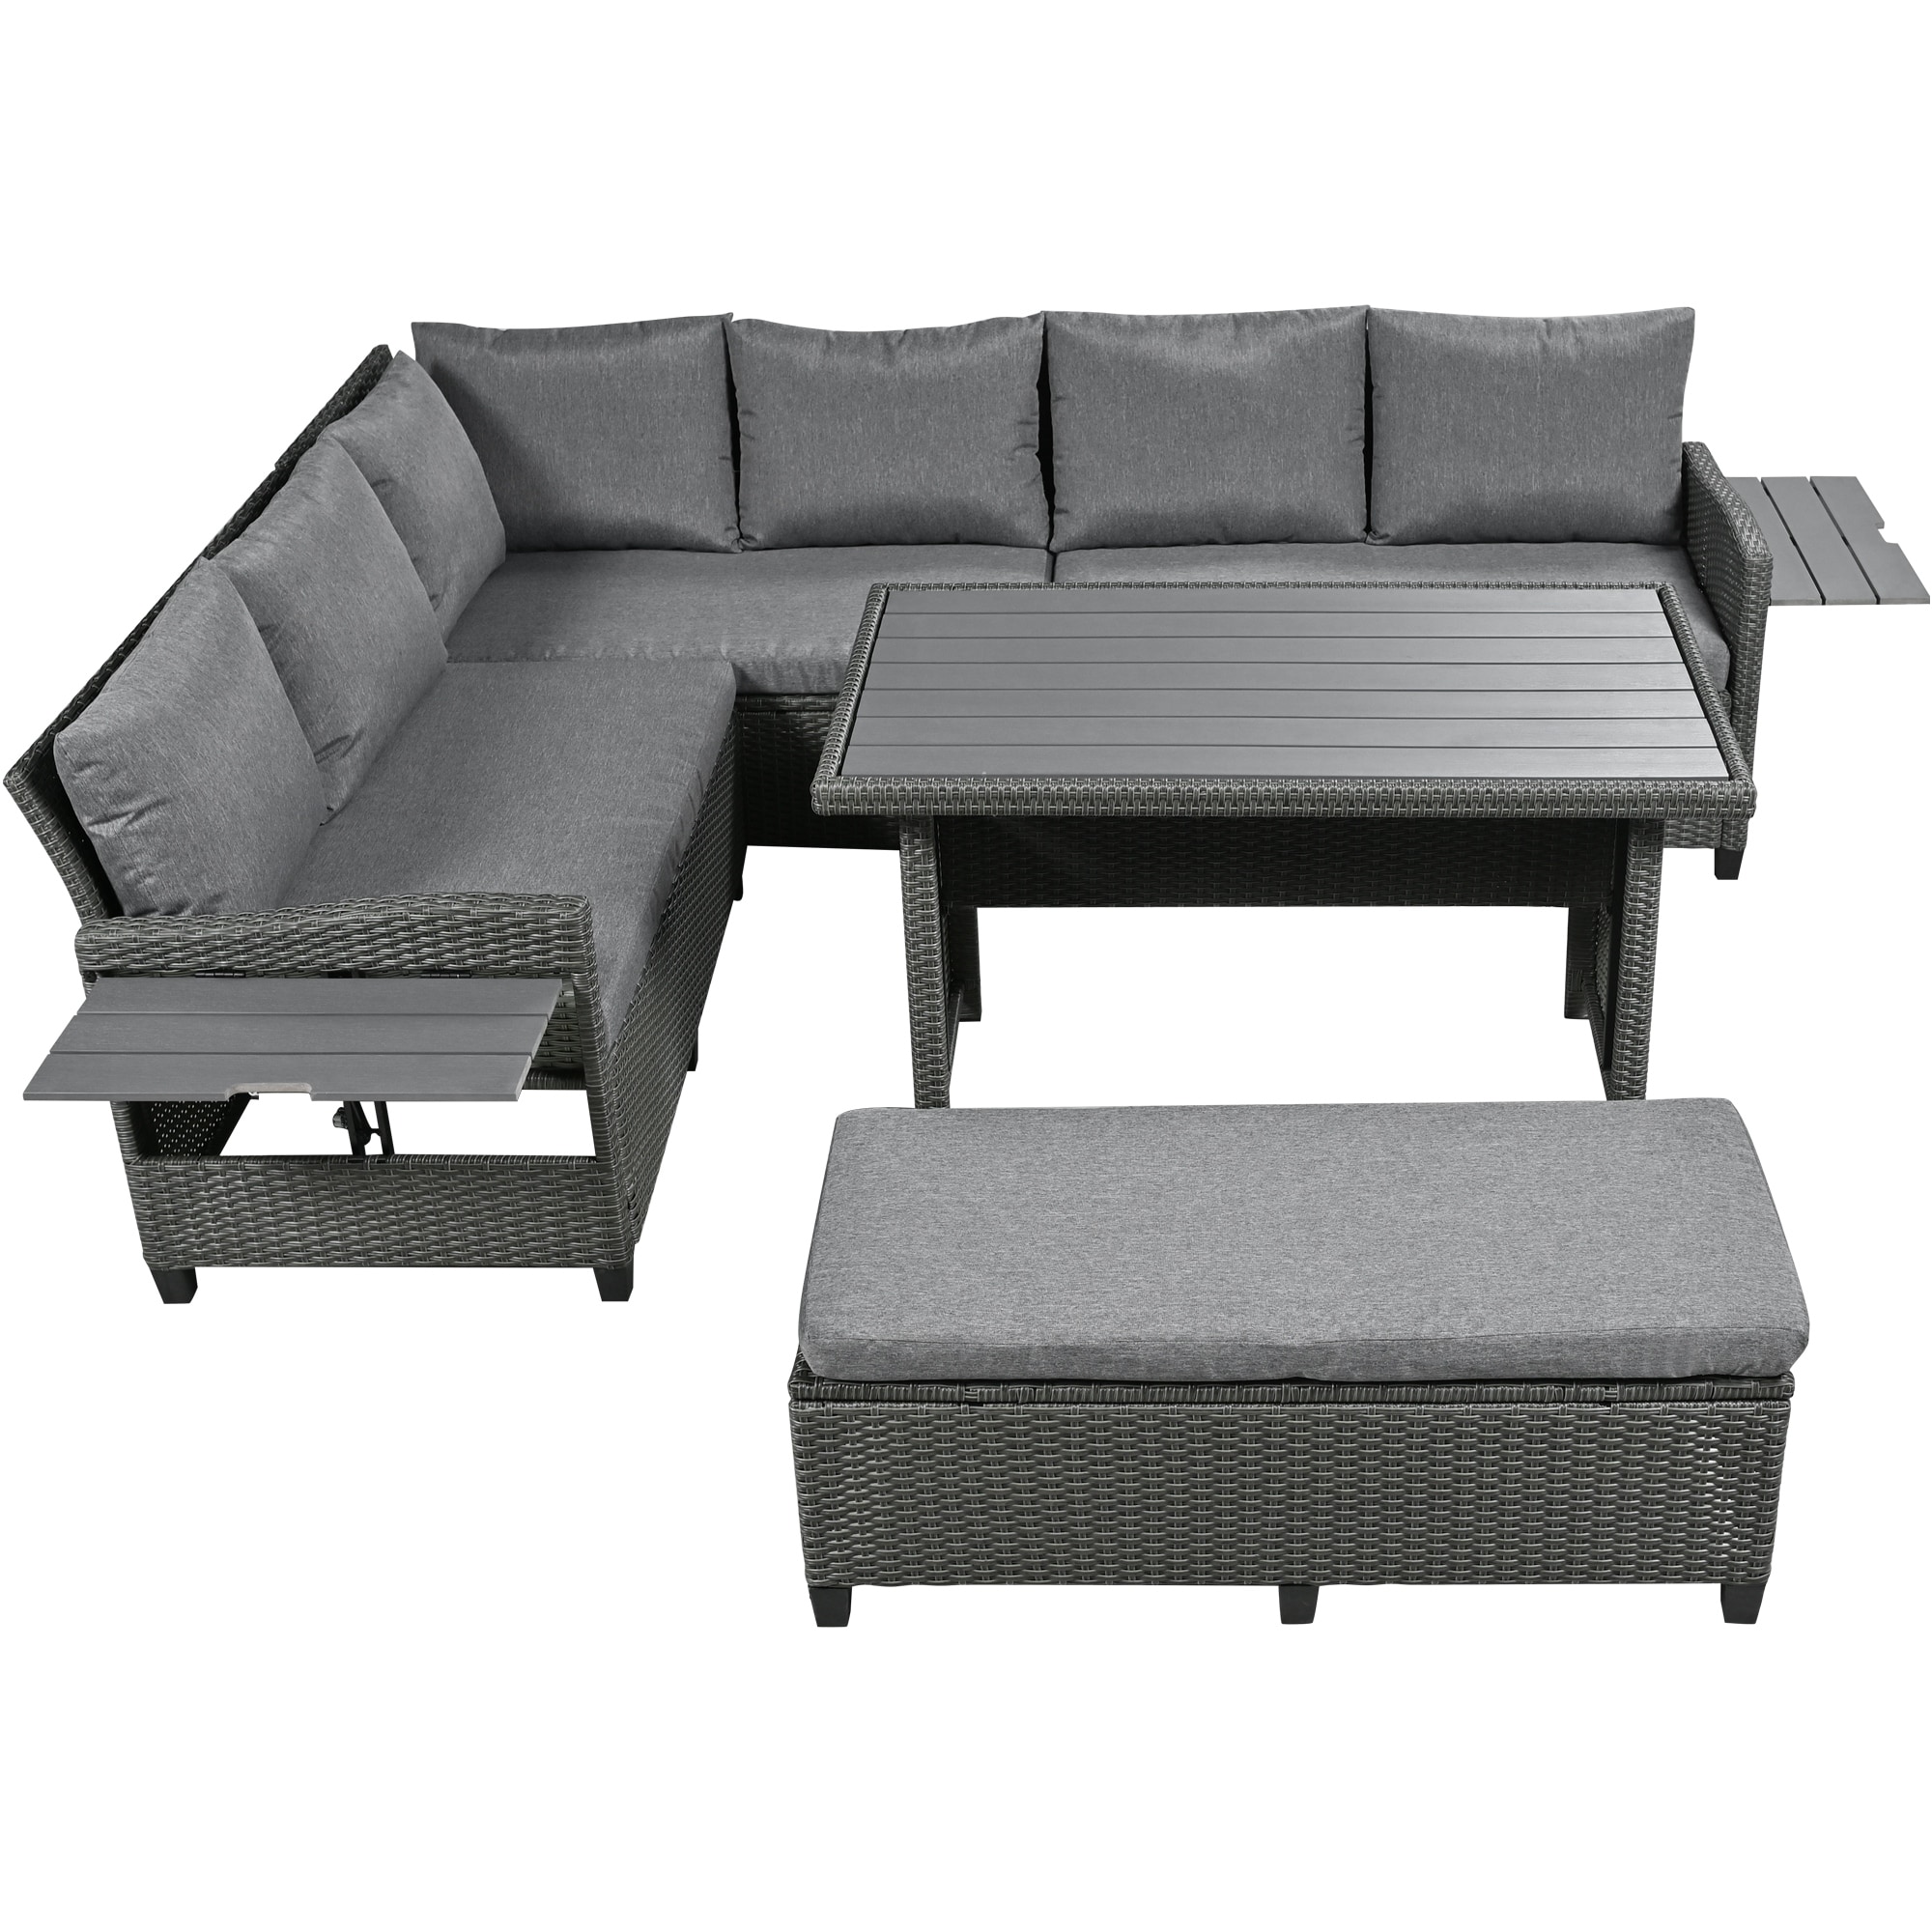 5-piece Outdoor Patio Rattan L-shaped Sectional Sofa Set With Extendable Table